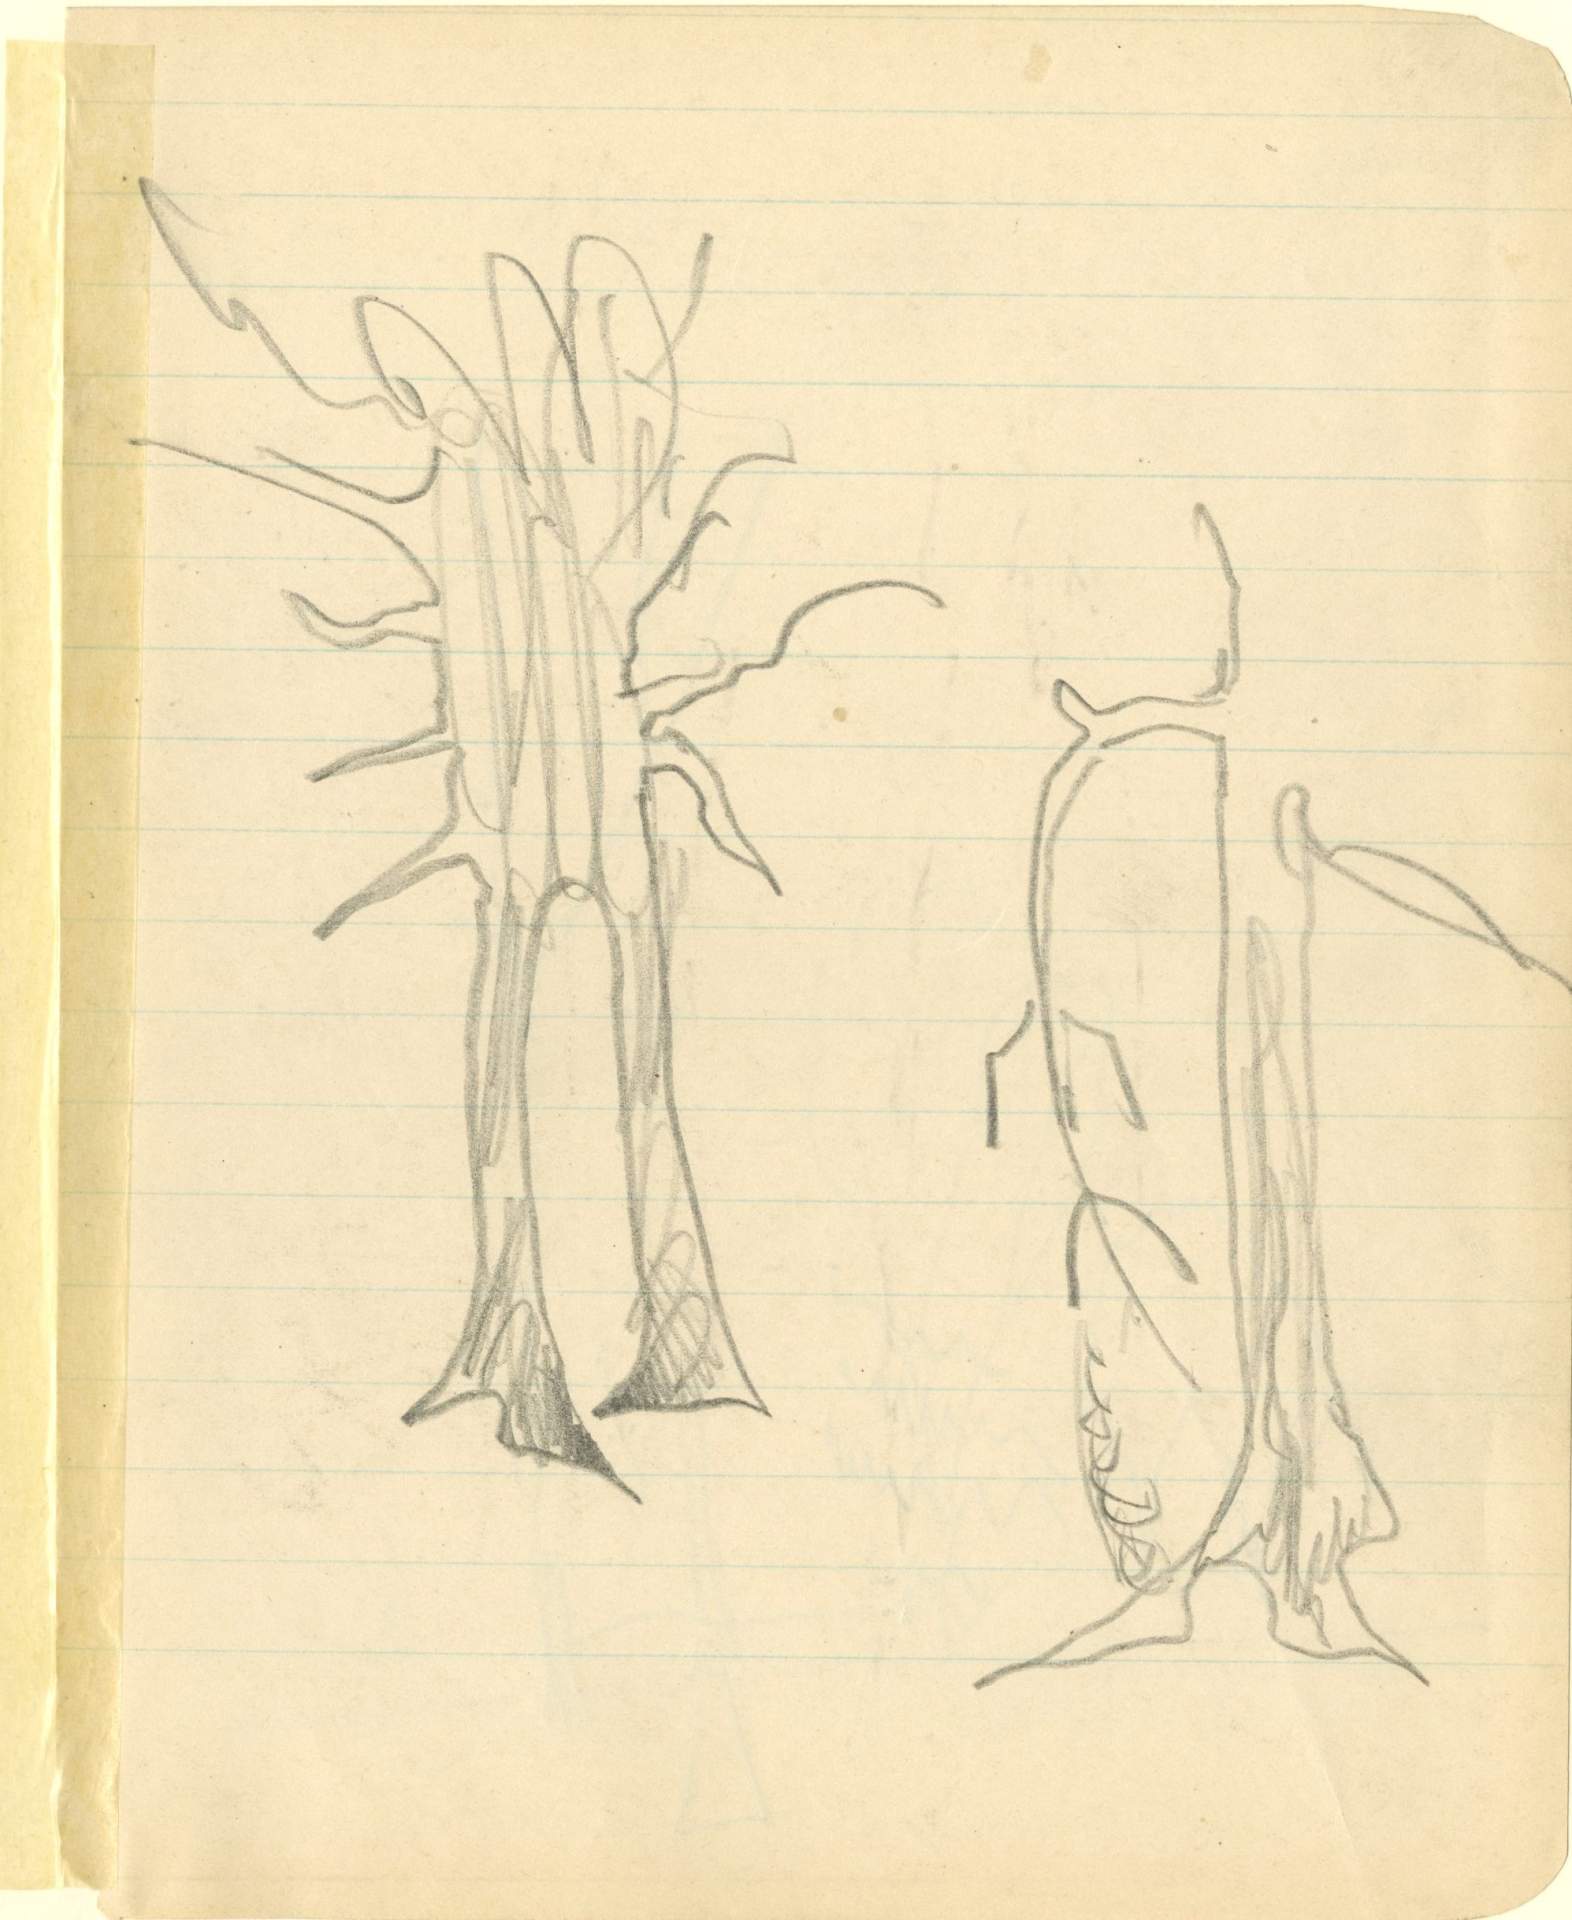 Two trees with sprawled branches